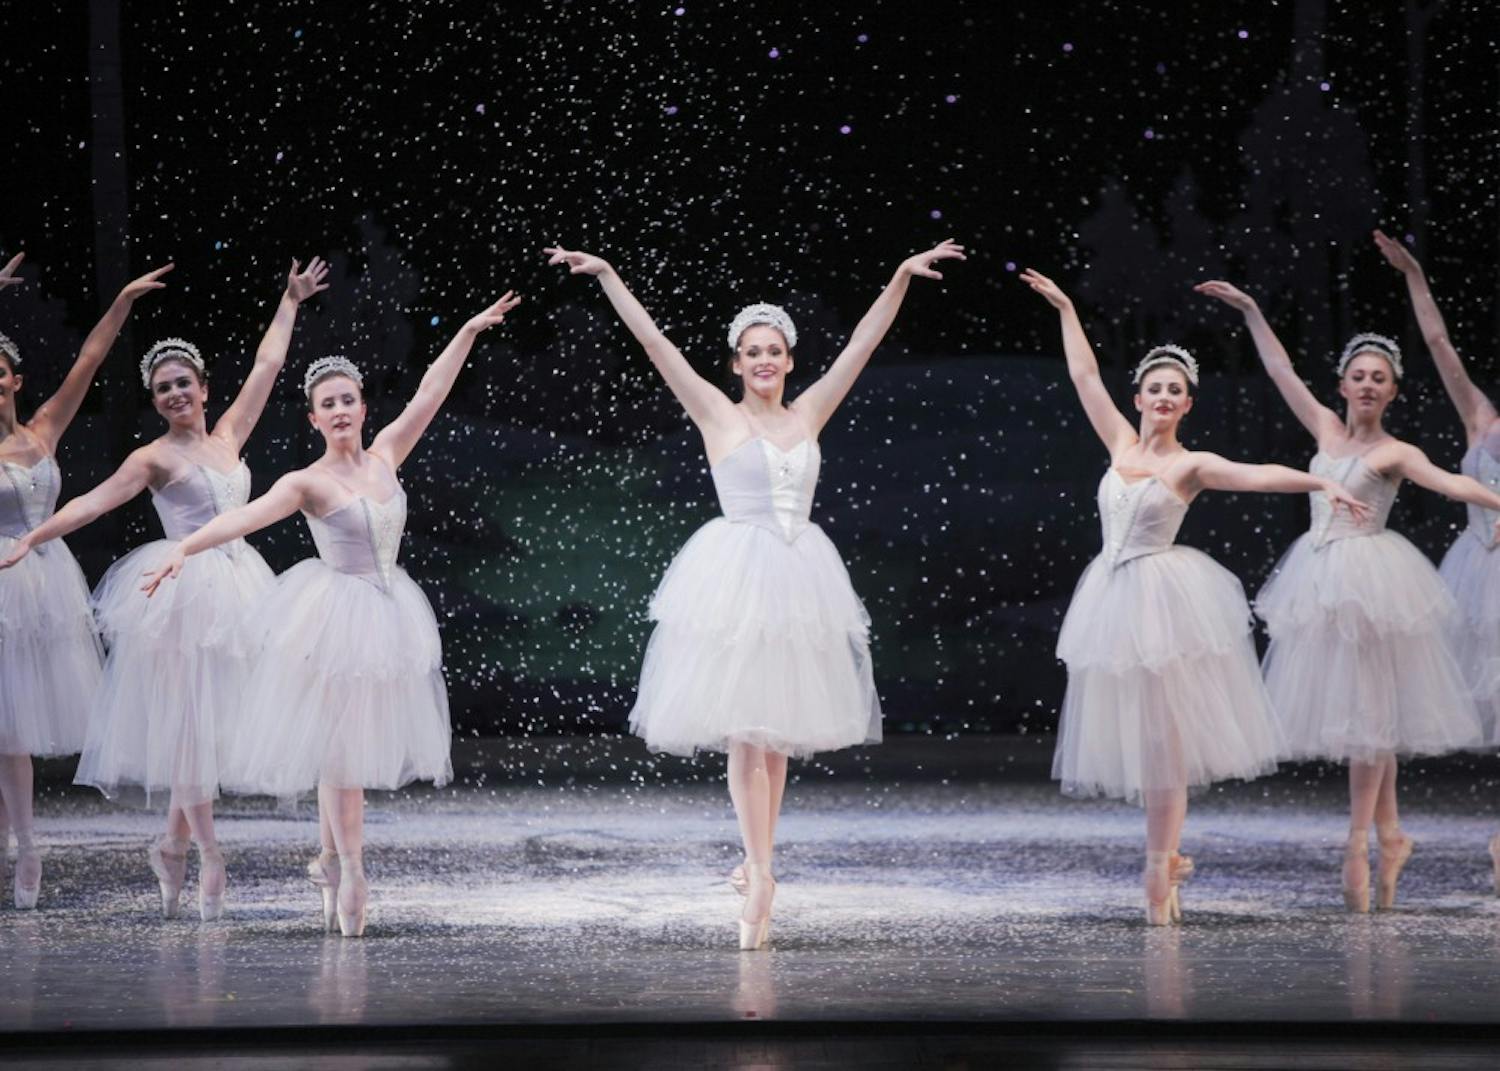 GALLERY: Looking back on 9 years of "The Nutcracker" at IU